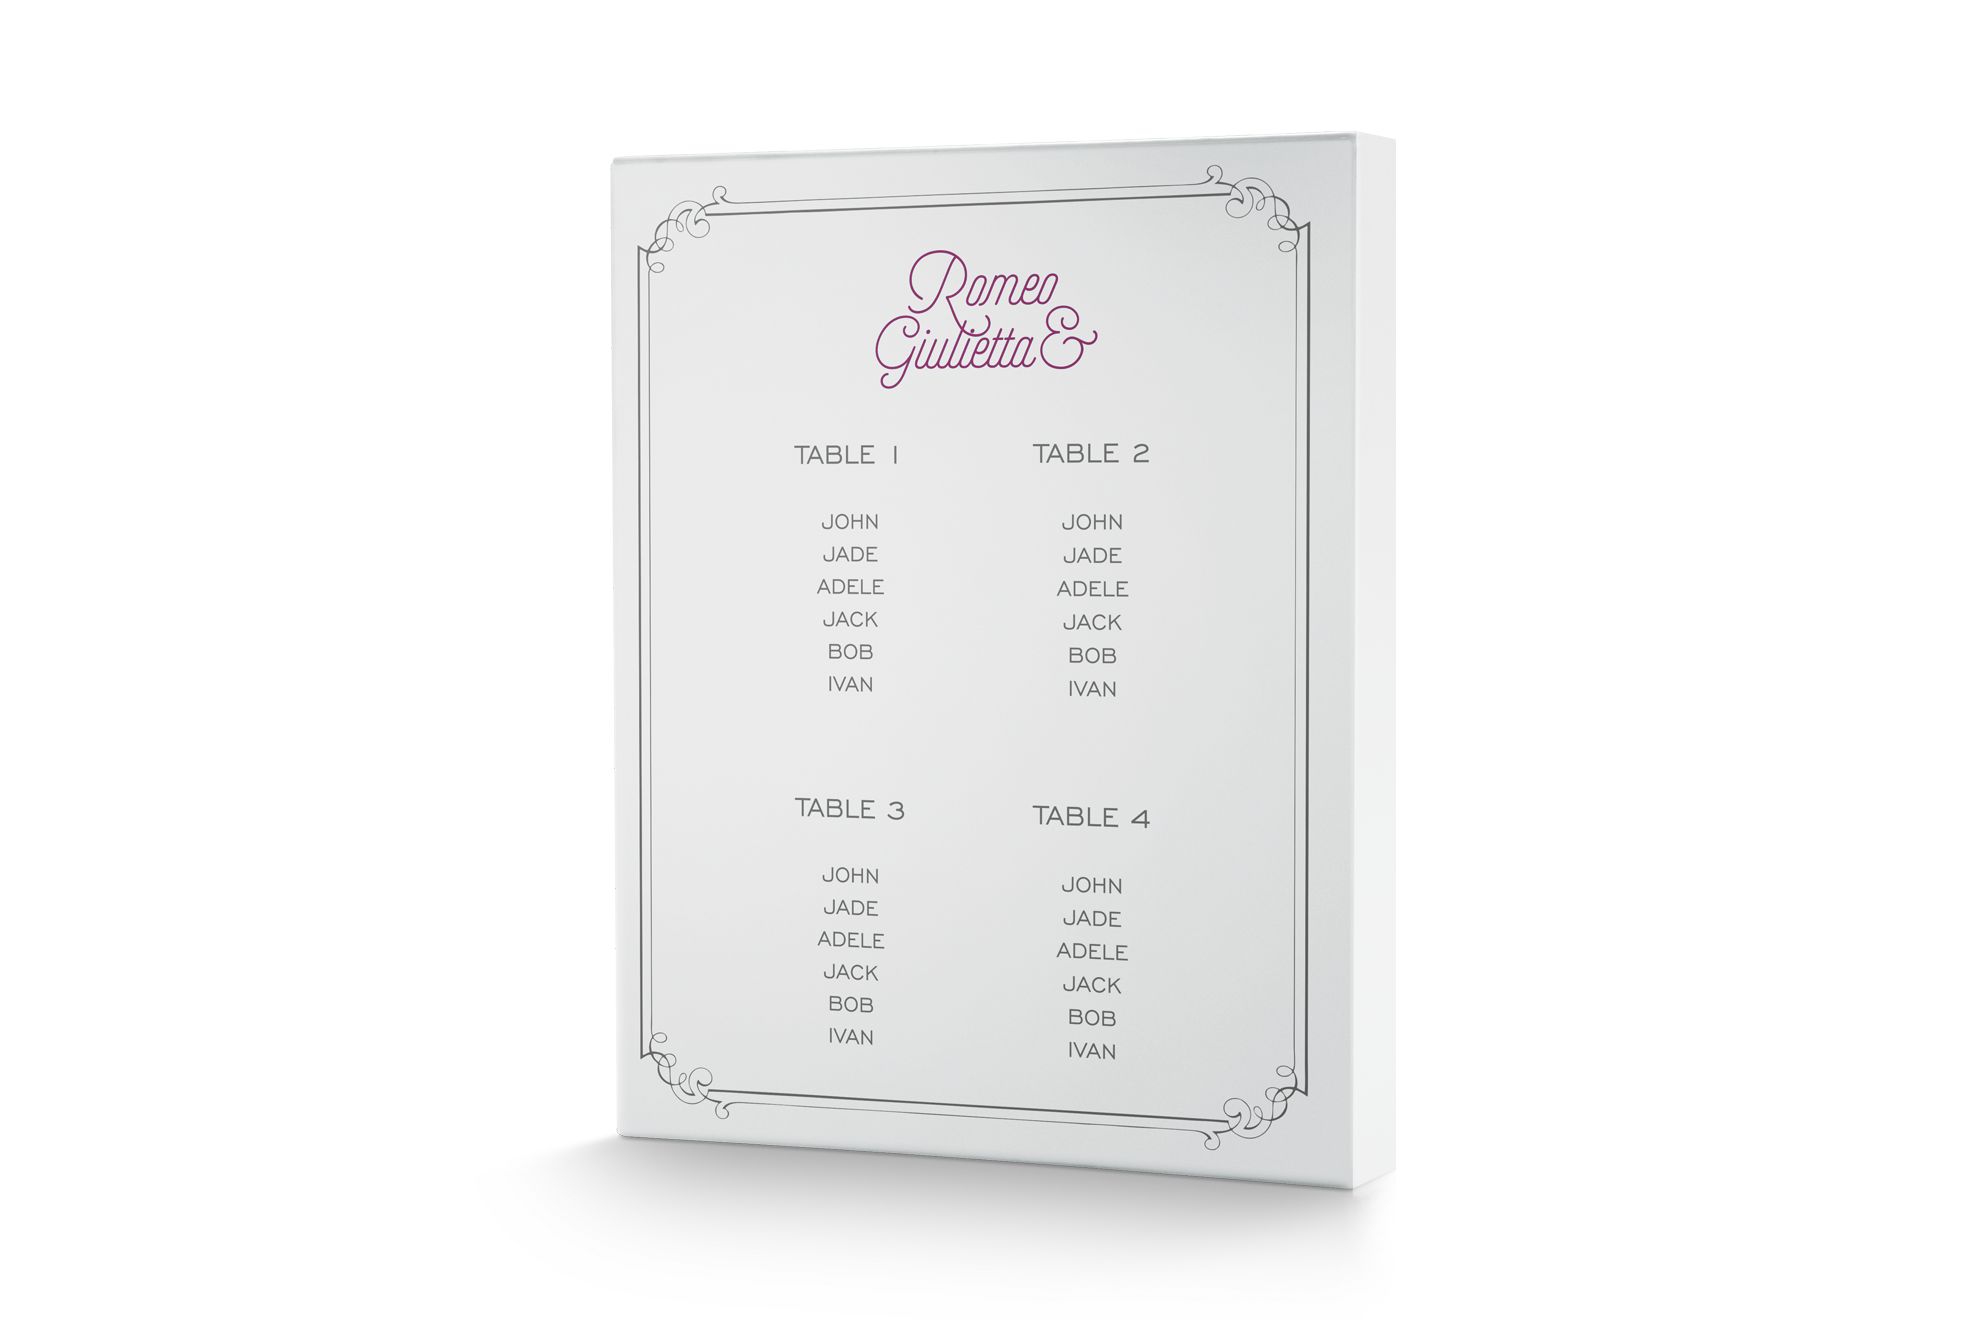 Wedding Table Planc: Print online, it's worth it!: Customise your wedding table plan for your special wedding day. Realise your favourite table plans with Sprint 24.